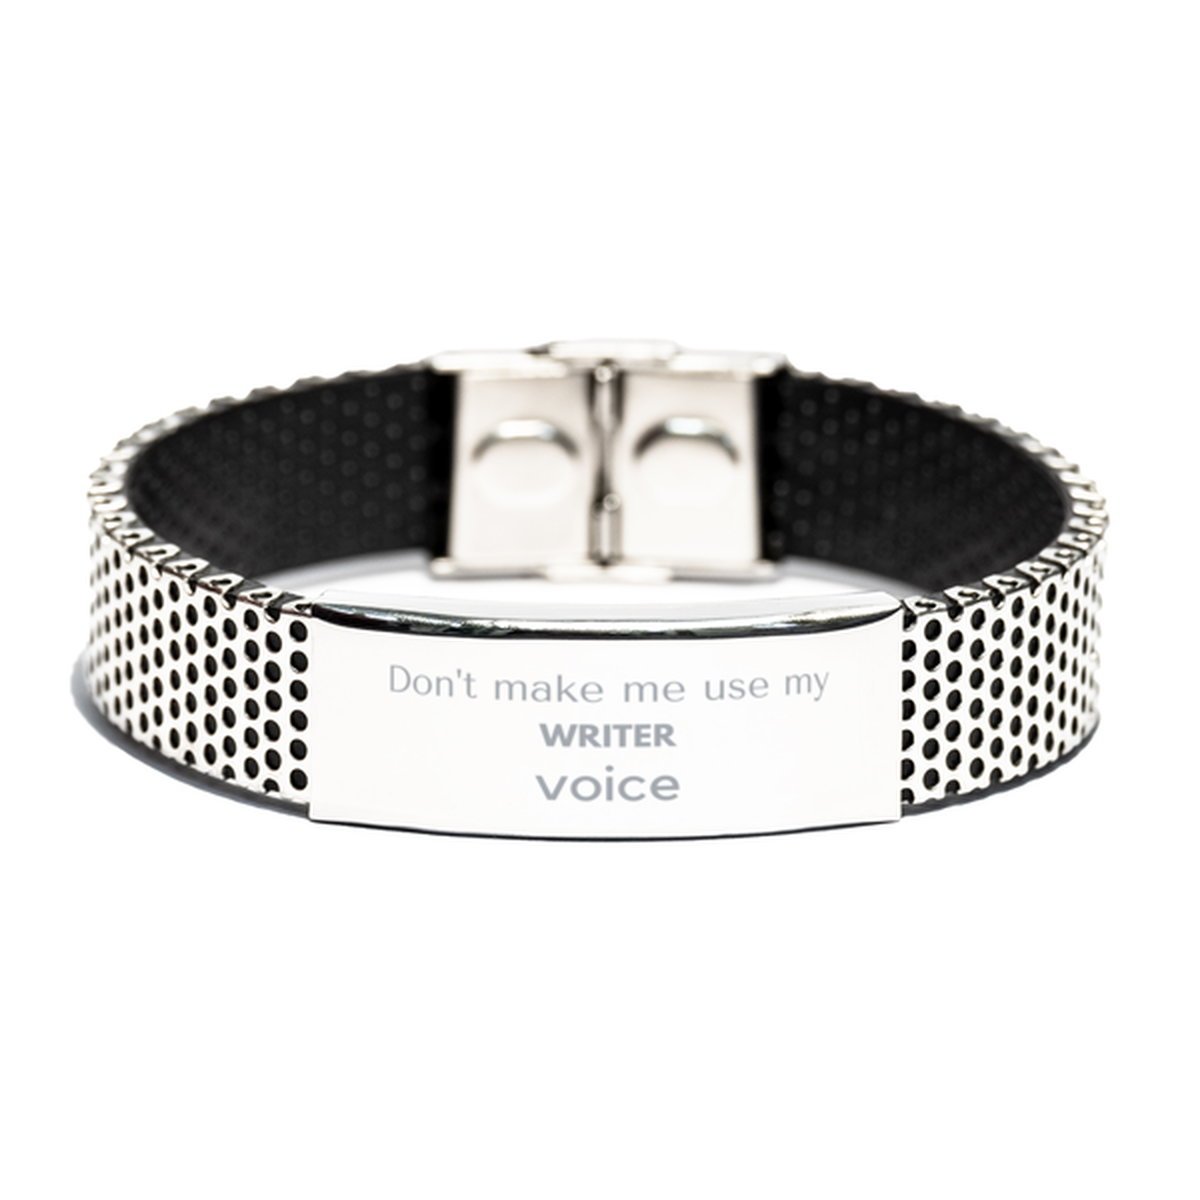 Don't make me use my Writer voice, Sarcasm Writer Gifts, Christmas Writer Stainless Steel Bracelet Birthday Unique Gifts For Writer Coworkers, Men, Women, Colleague, Friends